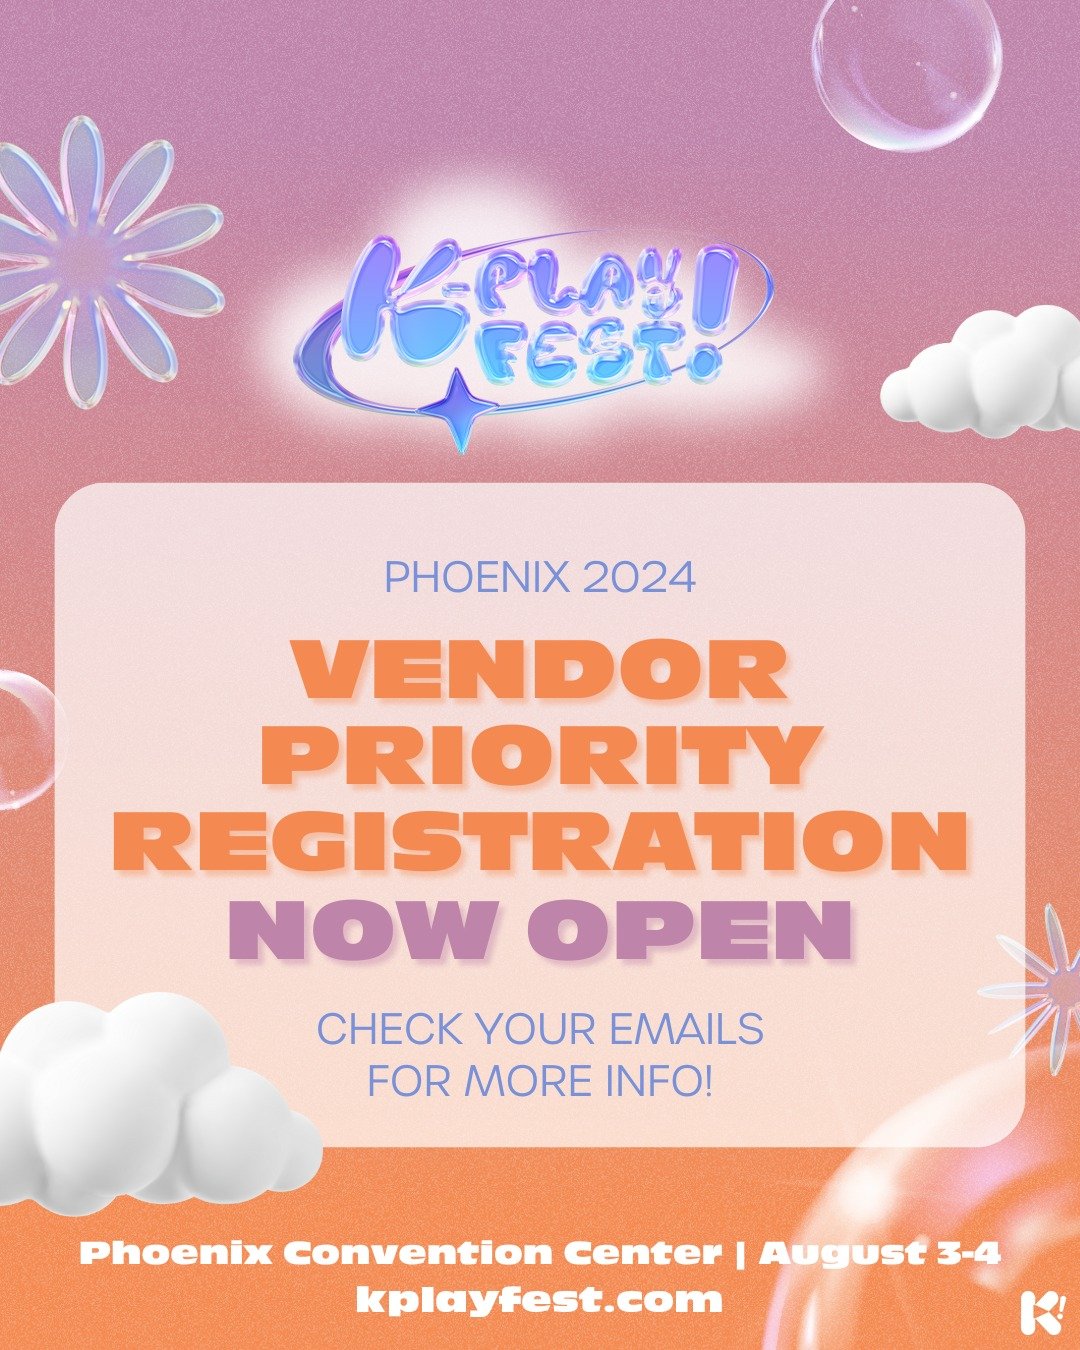 👋HEY VENDORS👋 Vendor Priority Registration for #kplayfestphoenix is now OPEN! 🤩 If you&rsquo;ve received an email ✉️ from us regarding priority registration, now is the time to SECURE YOUR SPOT! 🔒 

⭐️ Visit kplayfest.com for more information ⭐️
